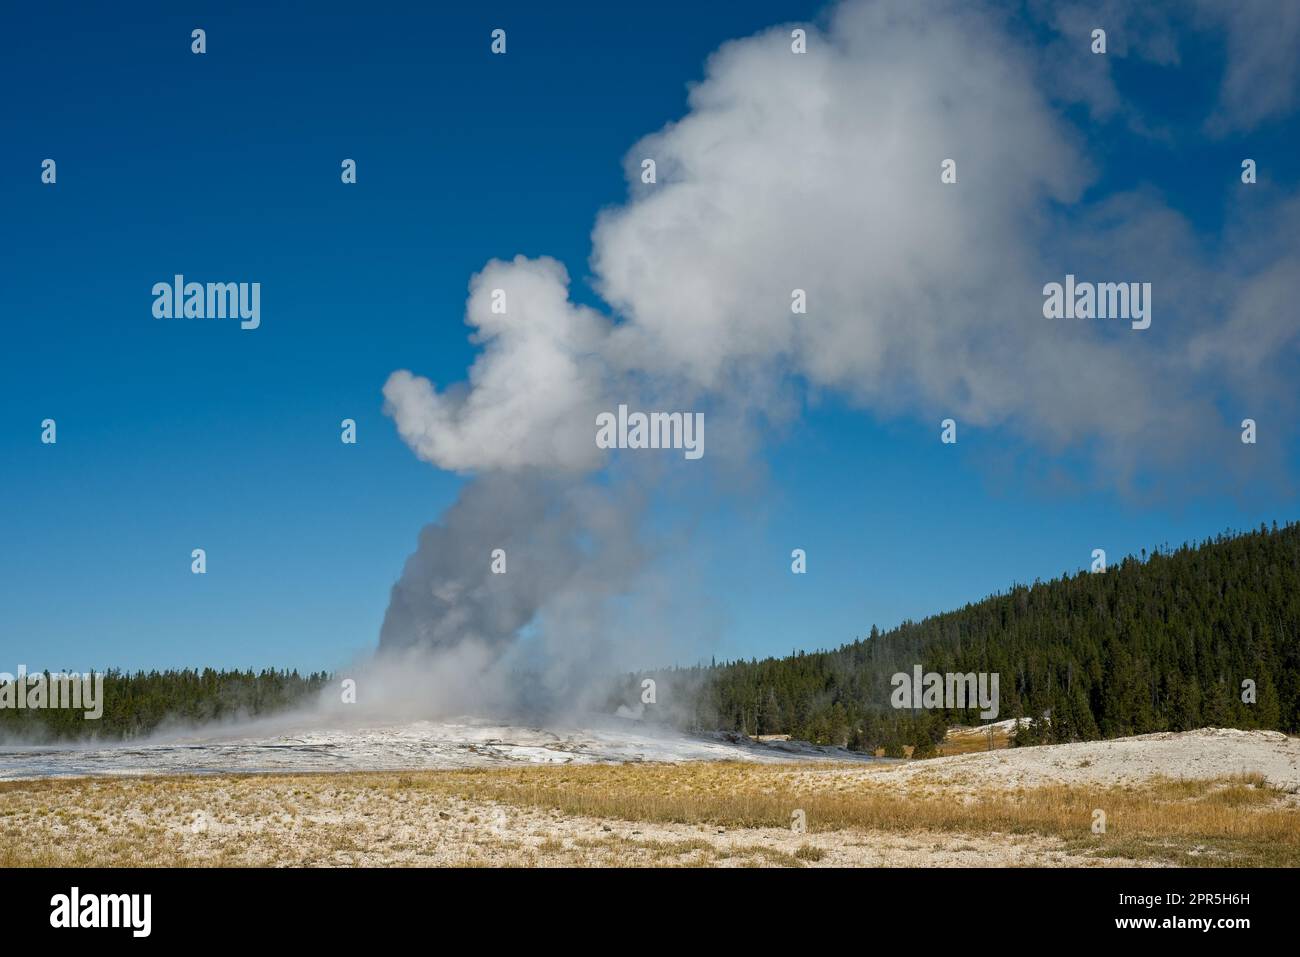 Old Faithful geyser in Yellowstone National Park erupting, with the vapor blowing away in the breeze Stock Photo